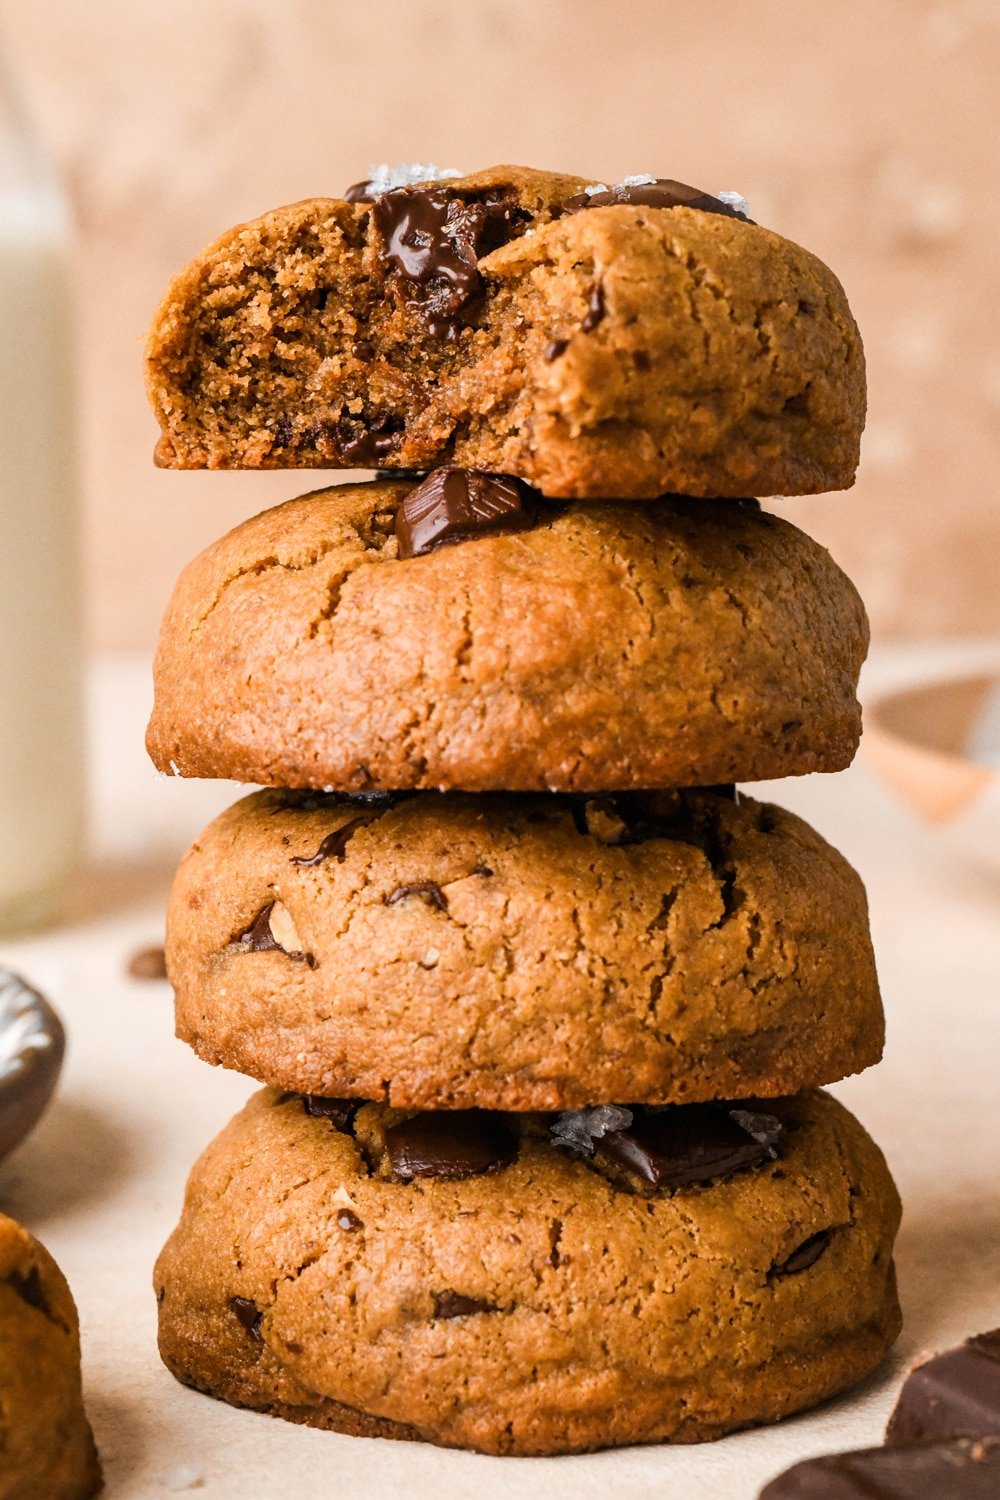 A tall stack of four dark chocolate chickpea flour cookies. The top cookie has a bite taken out of it to show the interior texture.